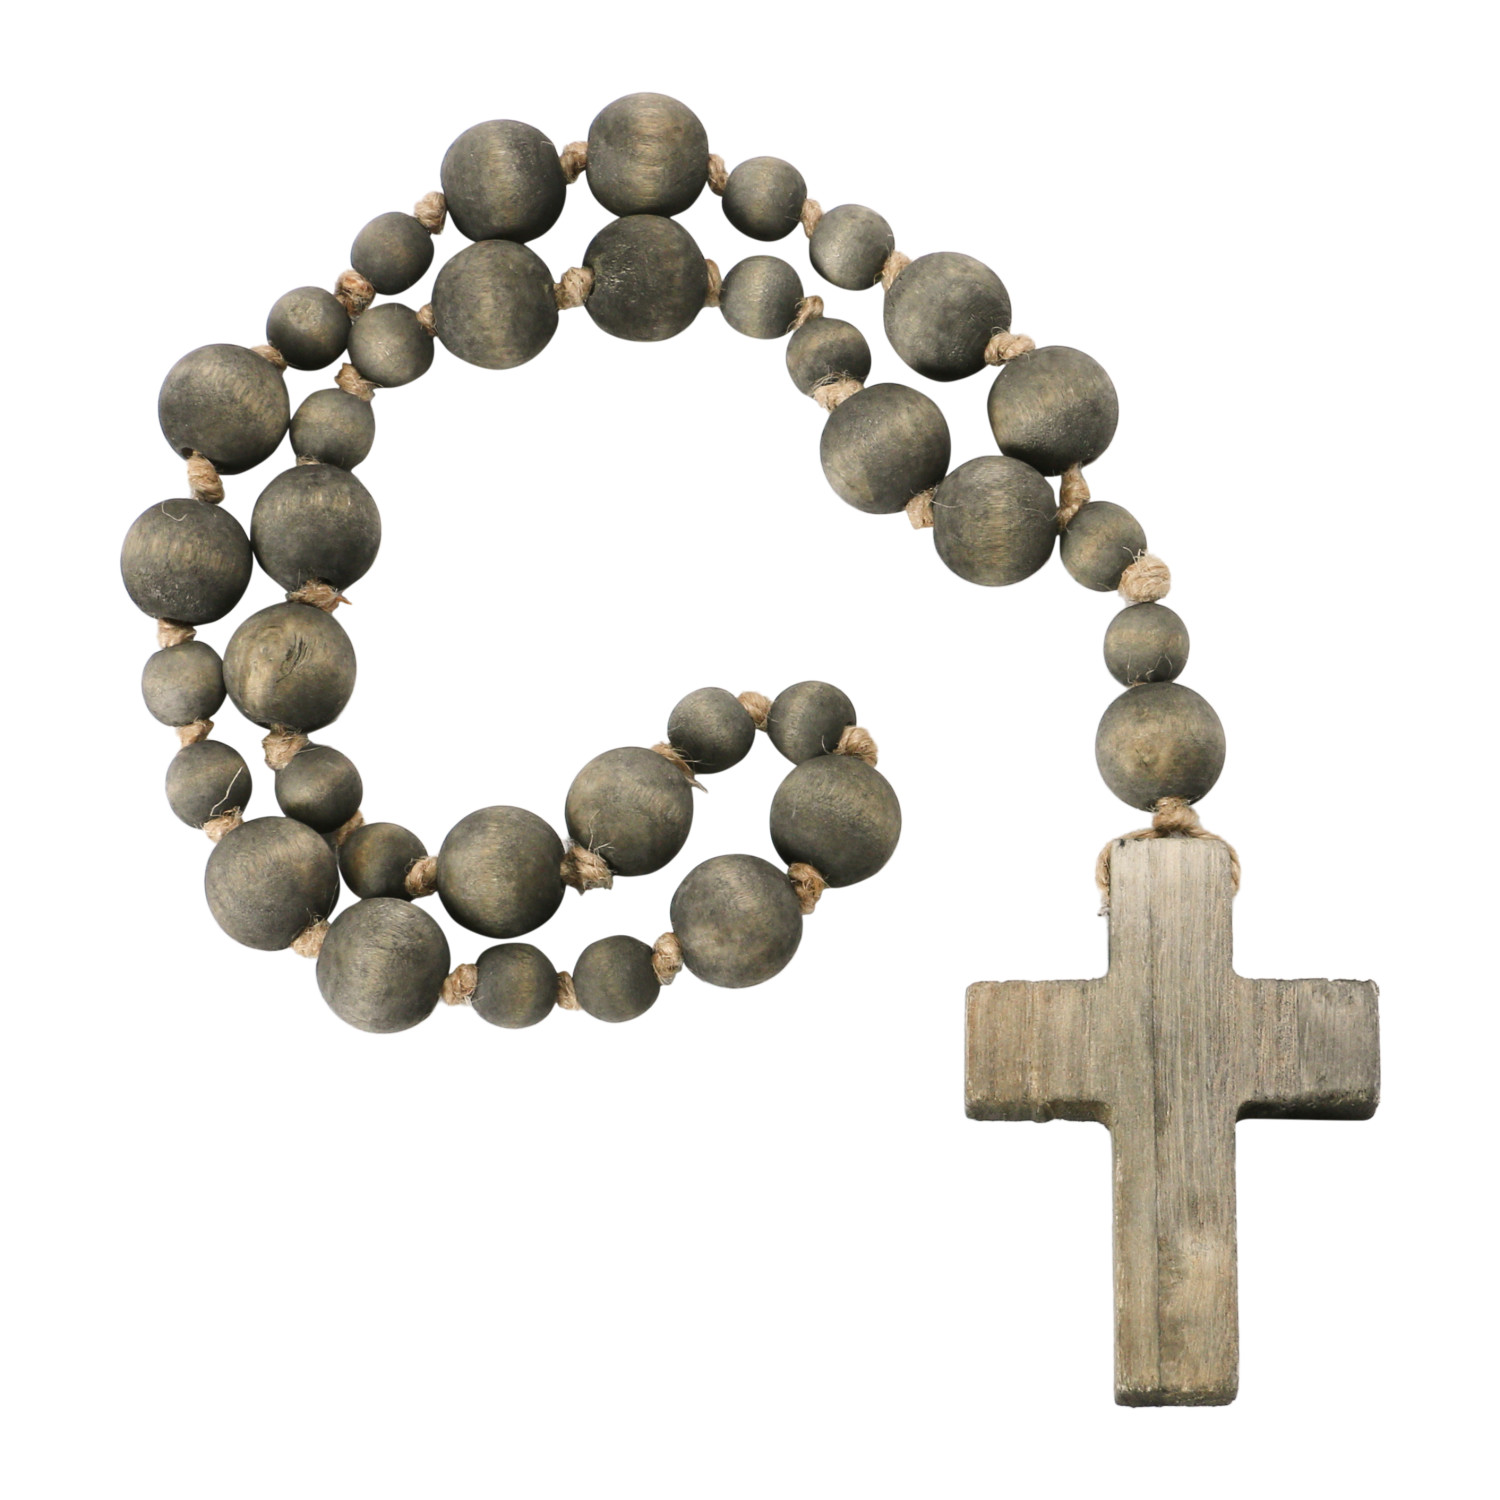  RERUICO Wooden Rosary Board with 54 Rosary & 22